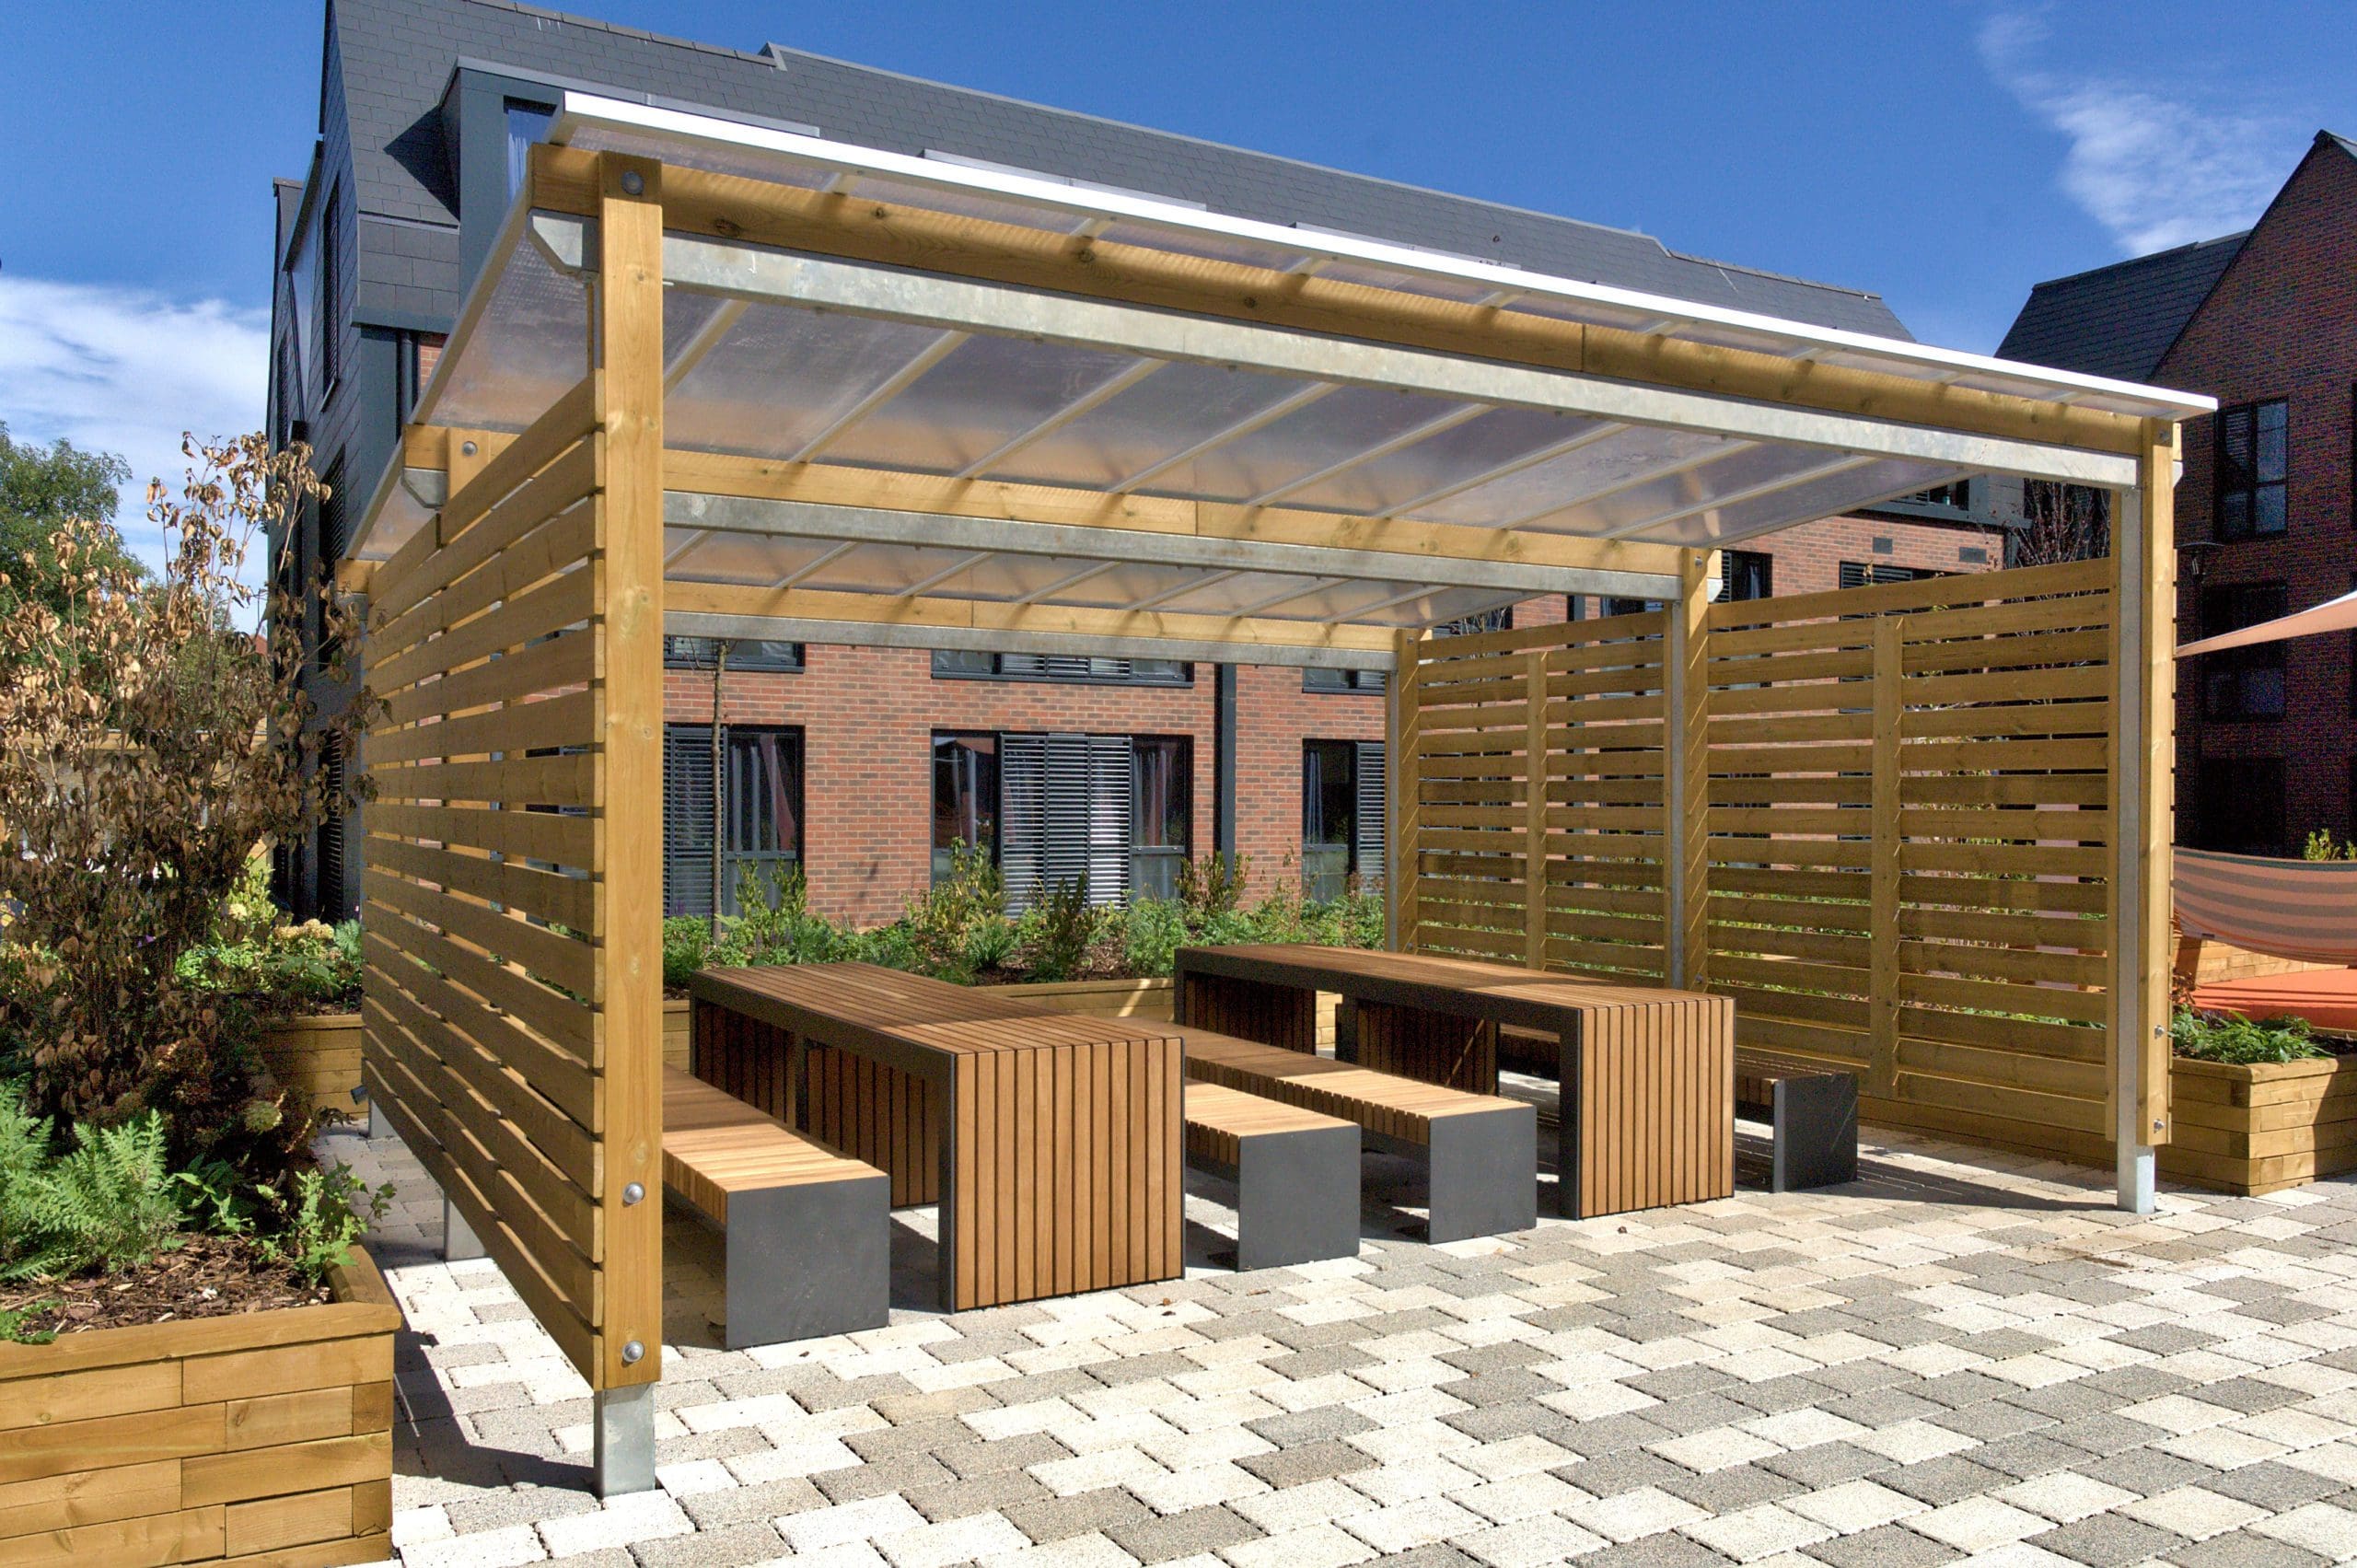 Outdoor canopy with wooden sides and see through plastic top covering a variety of wooden picnic tables and benches